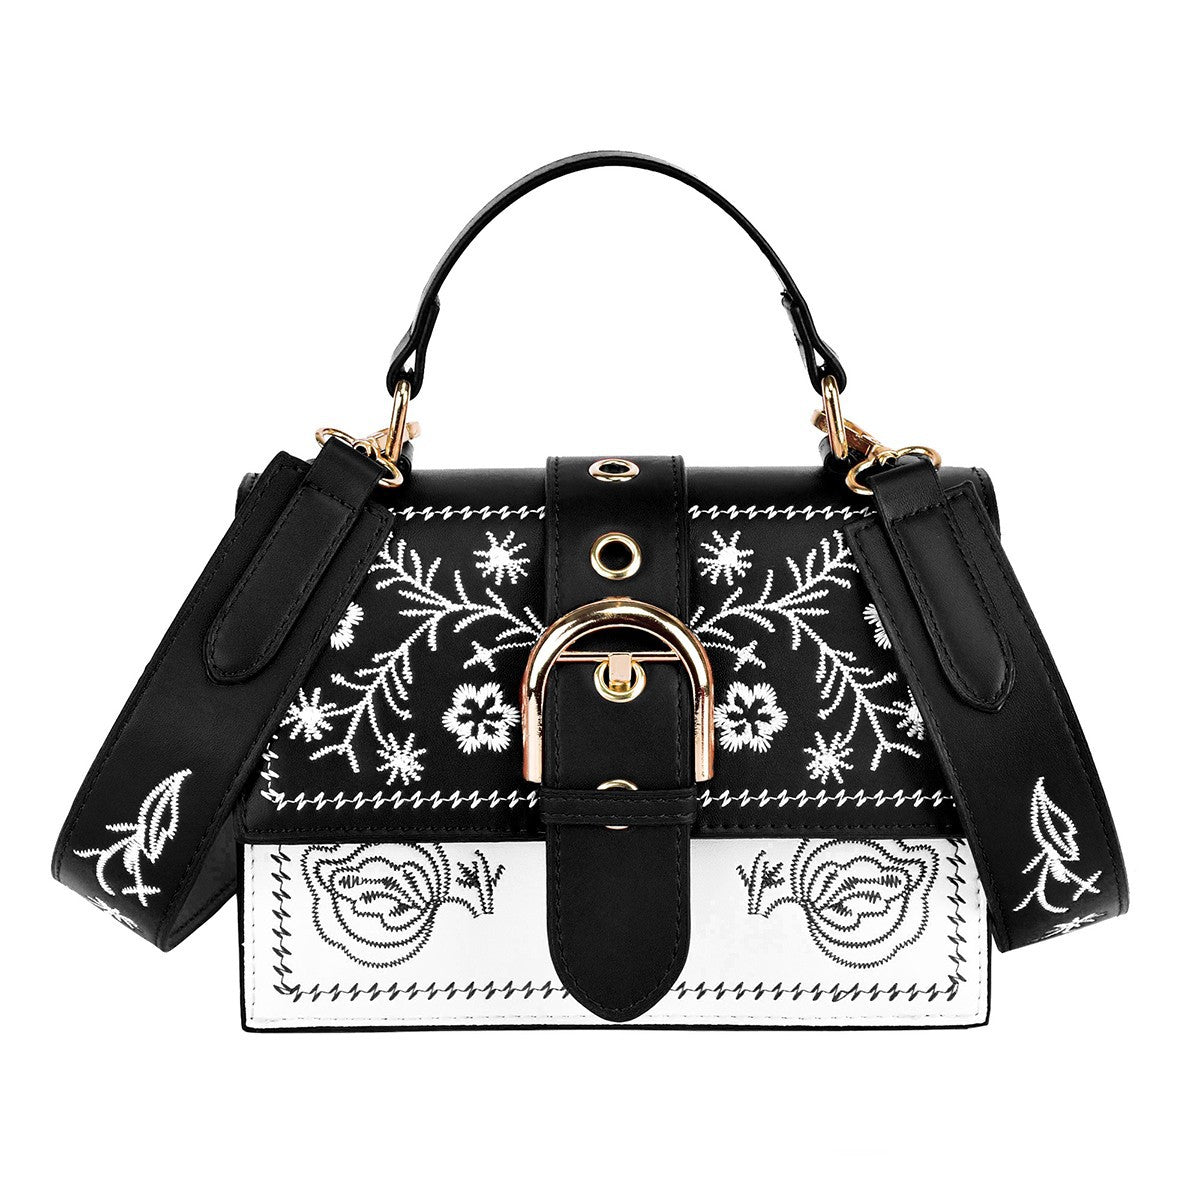 Embroidered Buckle 2 Tone Purse